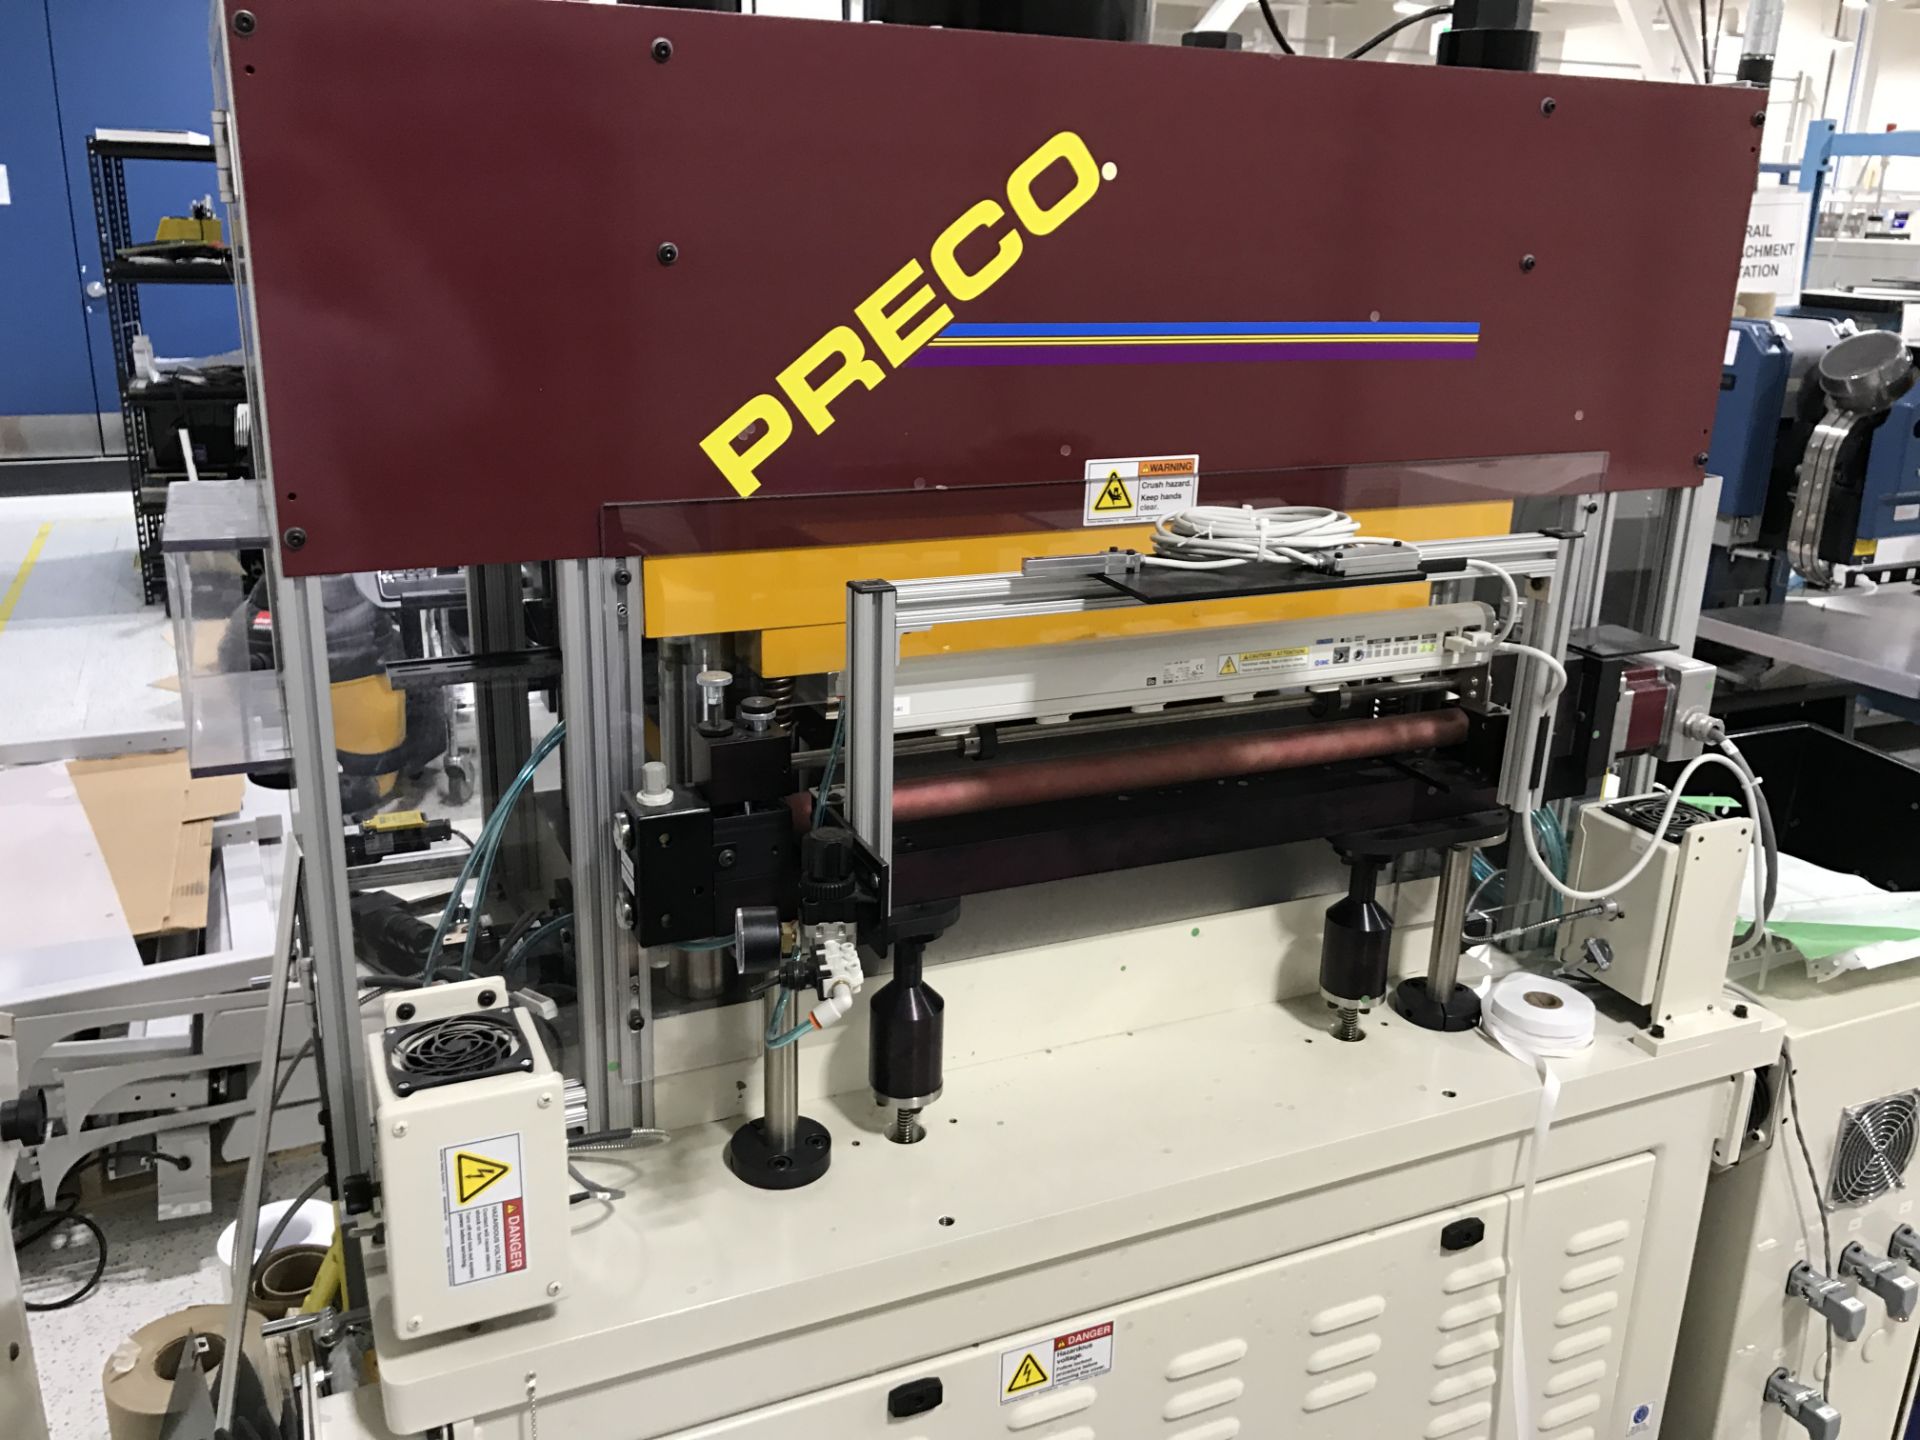 2016 Preco #2024-40T 40 Ton Series Die Cutting Press System, 208Volts, 3 Phase, 60Hz, 50k (SEE PICS) - Image 7 of 24